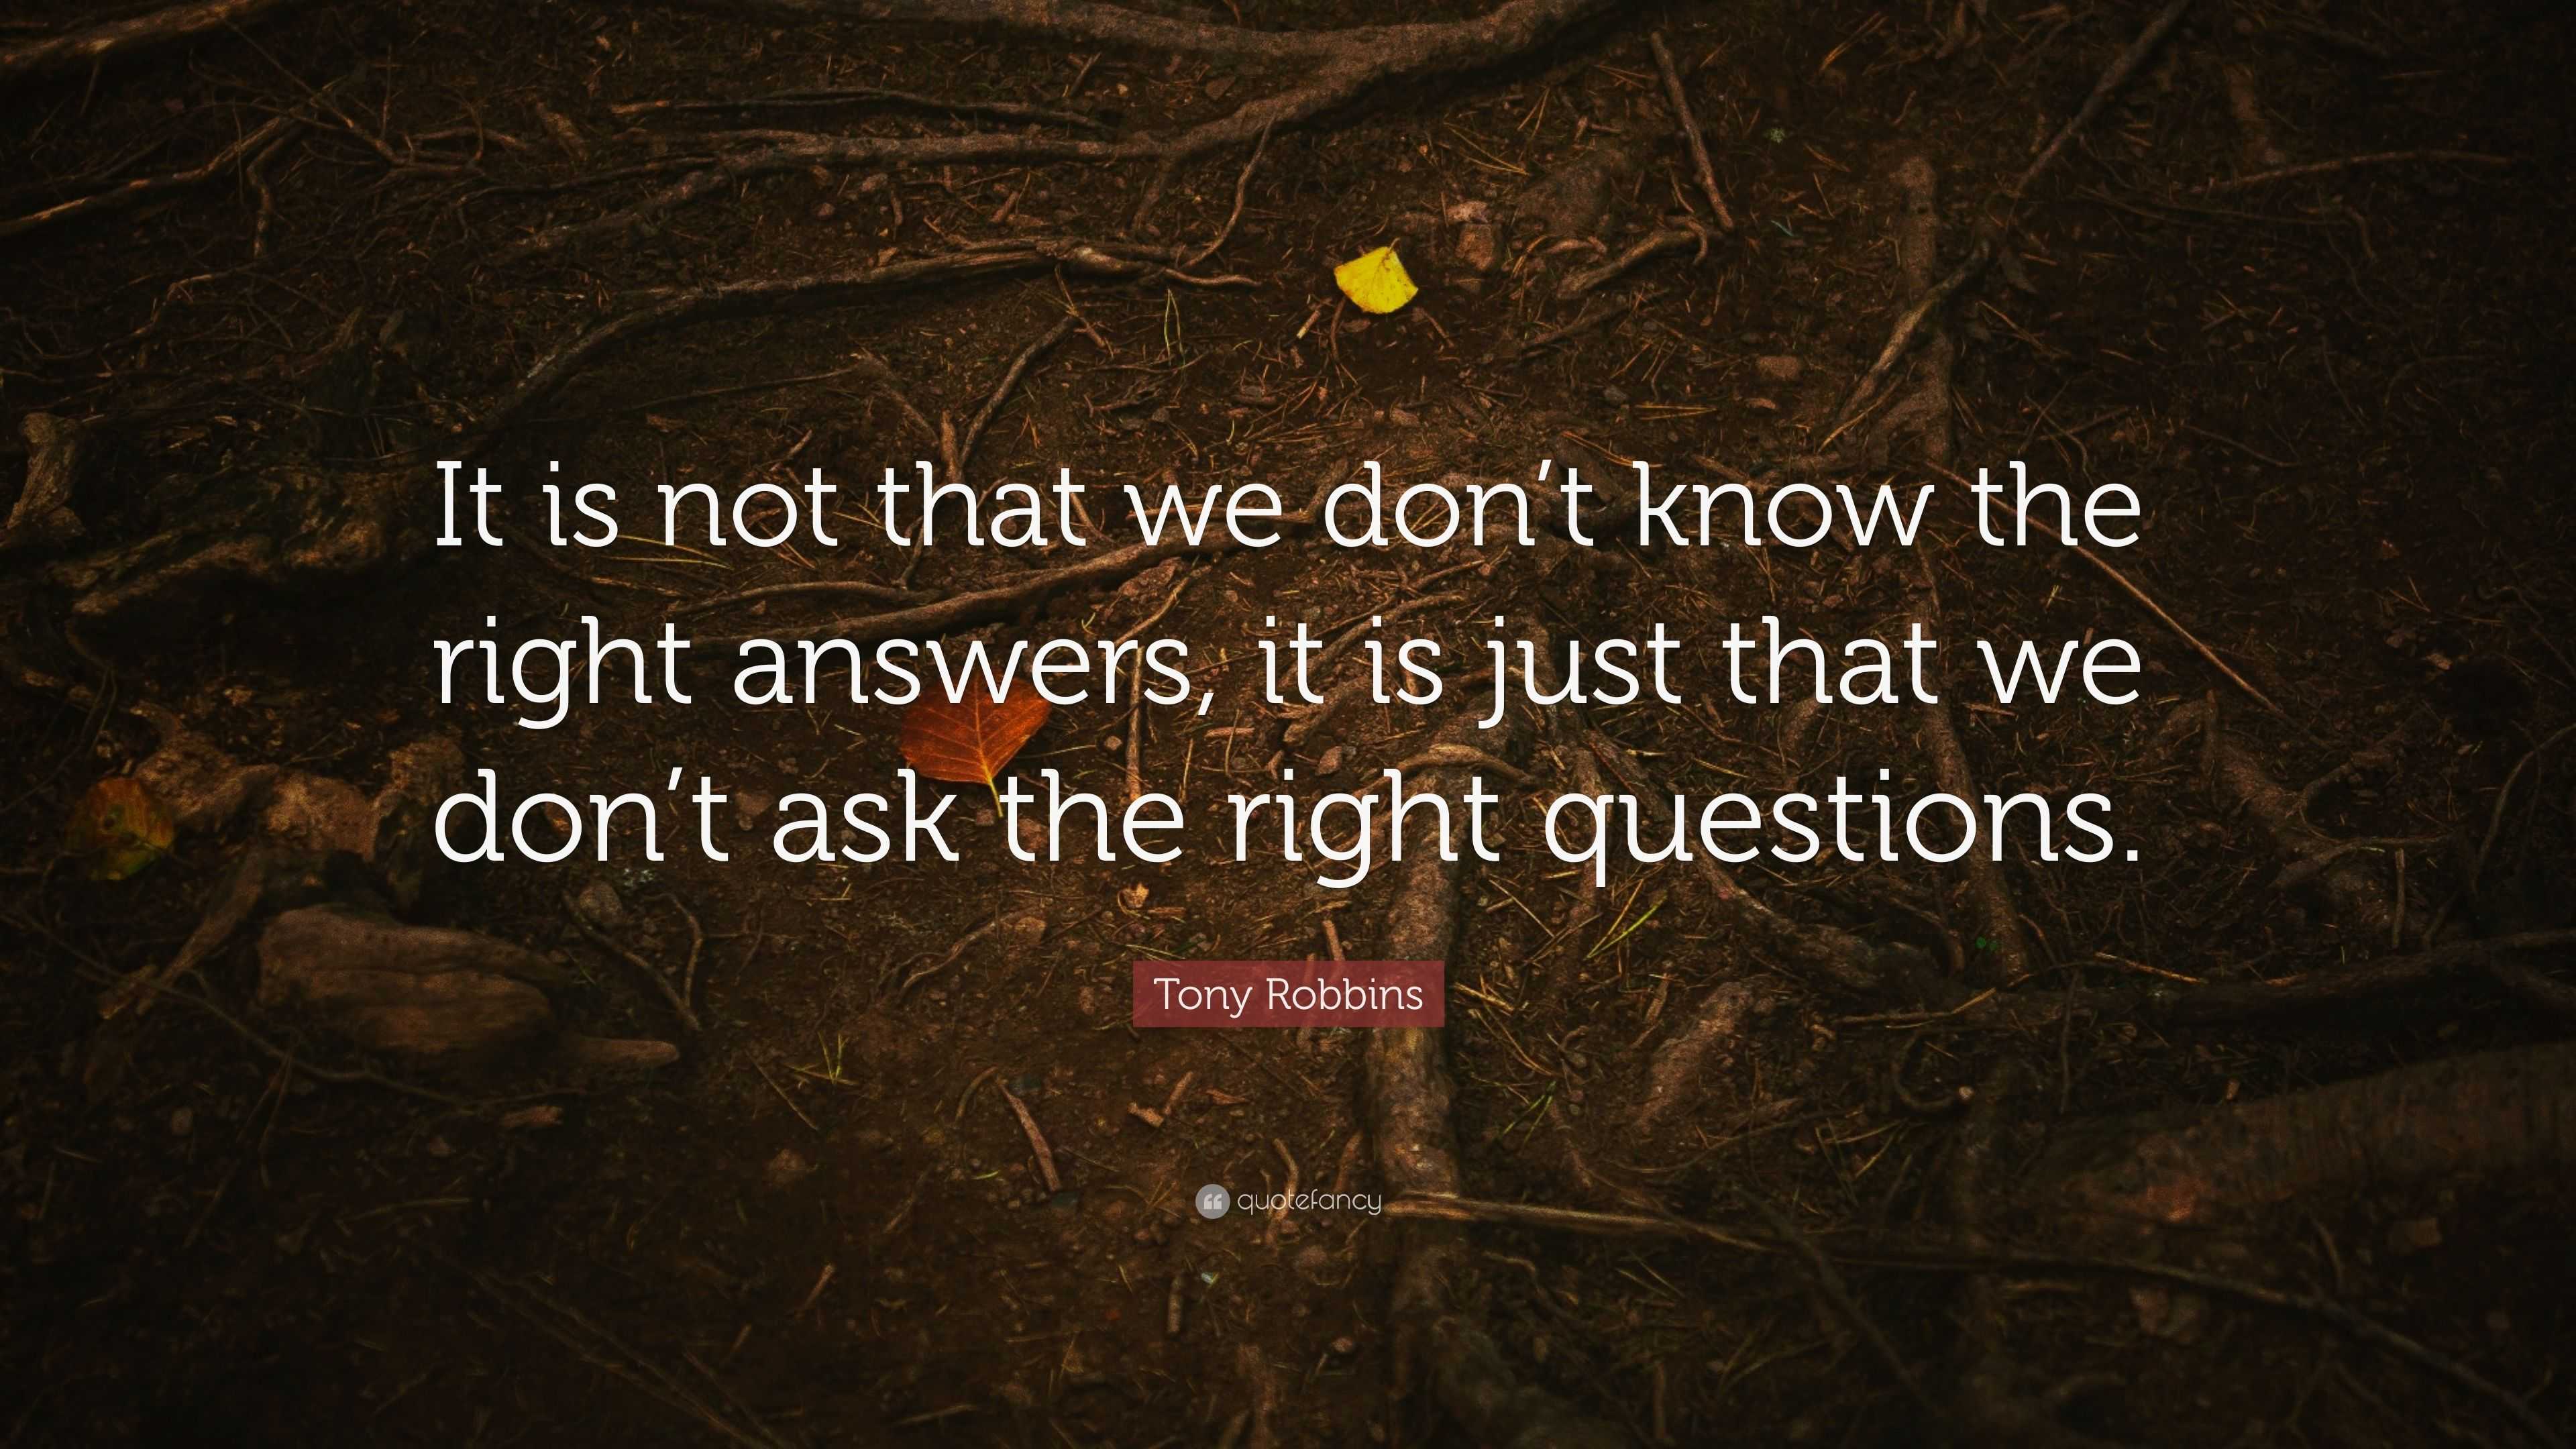 Tony Robbins Quote: “It is not that we don’t know the right answers, it ...